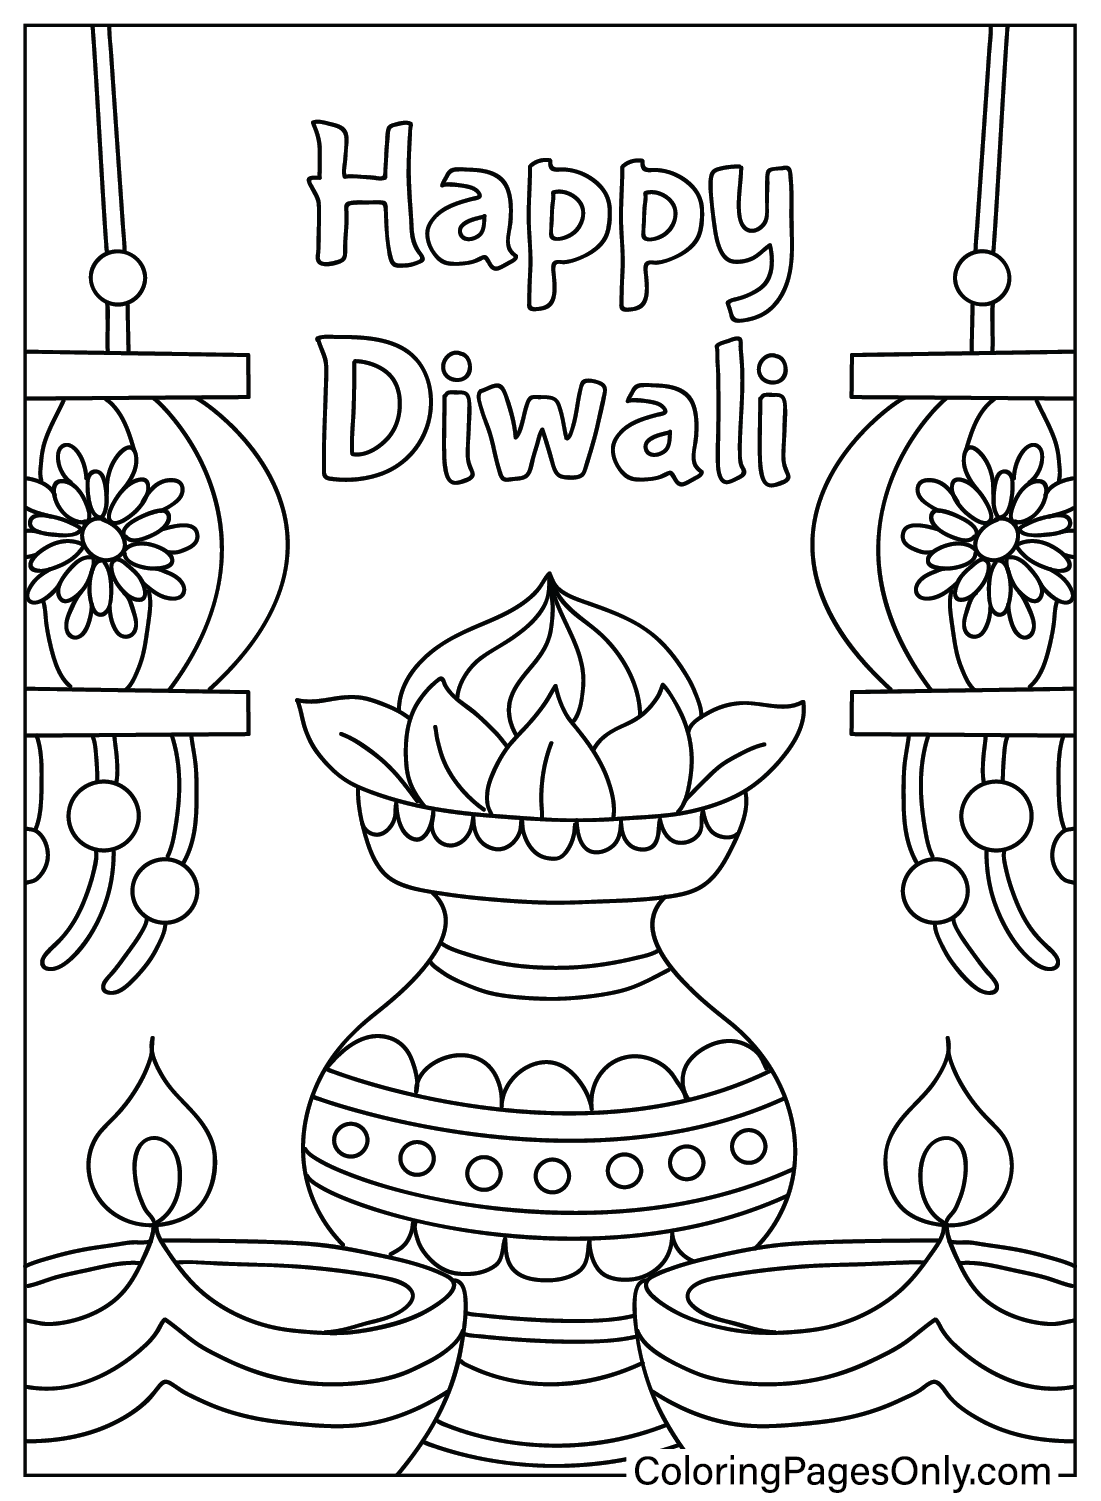 Diwali Coloring Page for Adults from Diwali